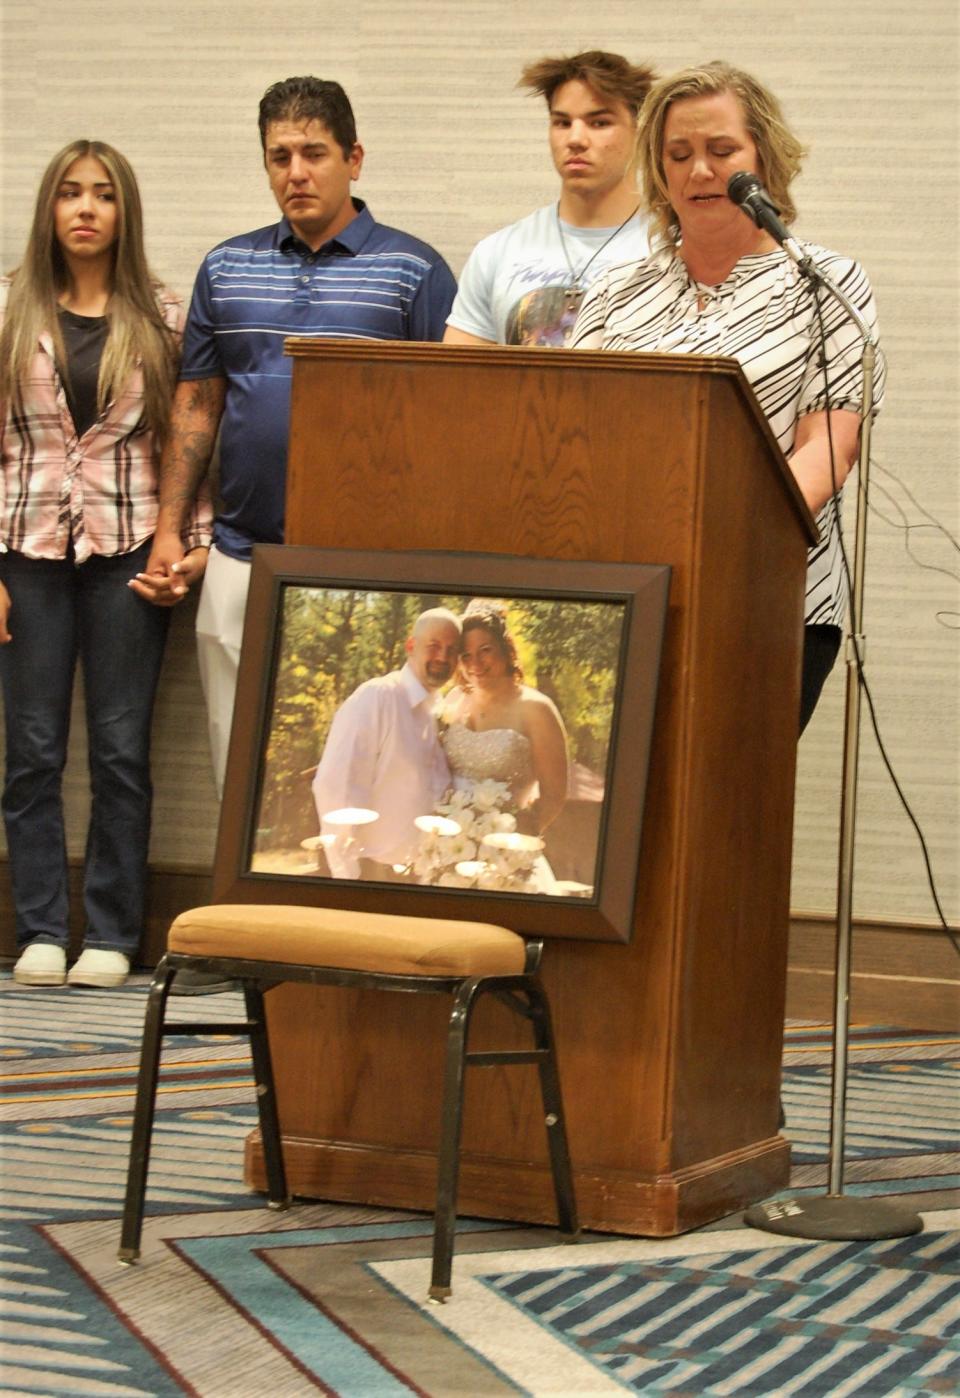 Flanked by family members, Kimberly Dotson, wife of the late Robert Dotson, talks about her husband's shooting dead at the hands of three Famington police officers during an April 20 press conference in Farmington, N.M.